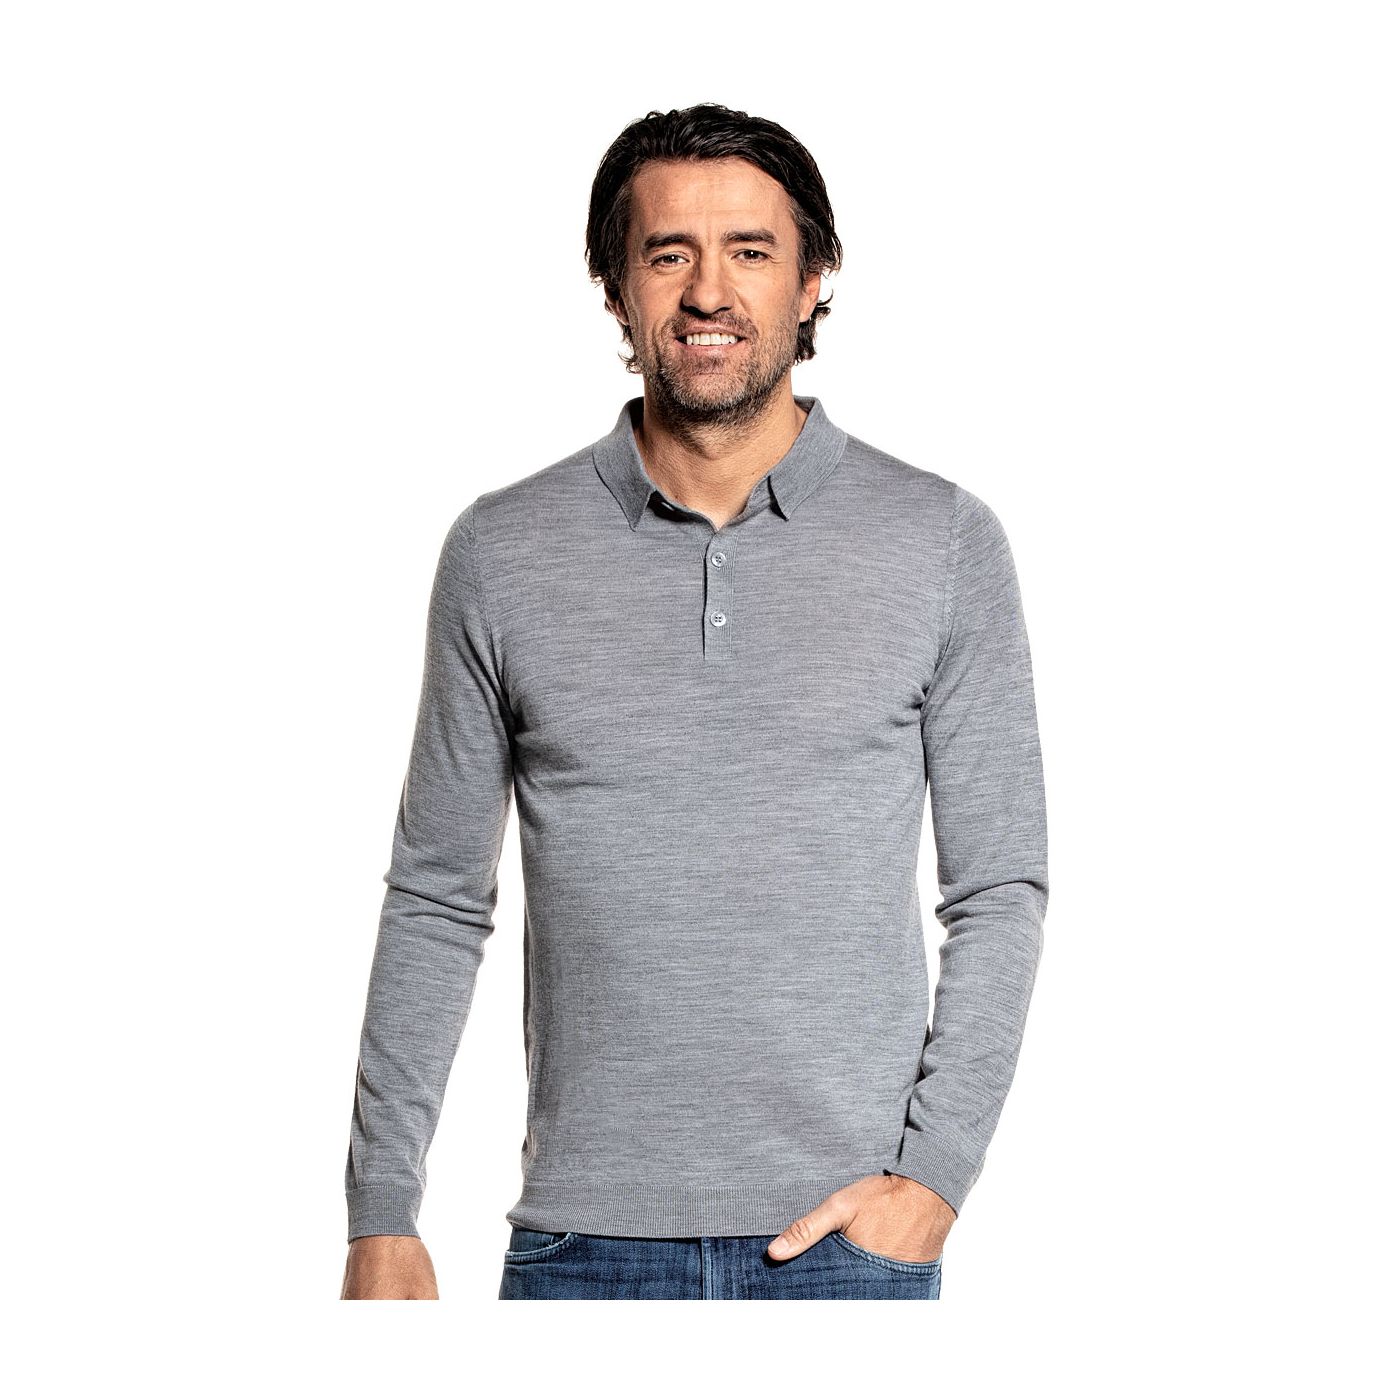 Polo long sleeve for men made of Merino wool in Grey